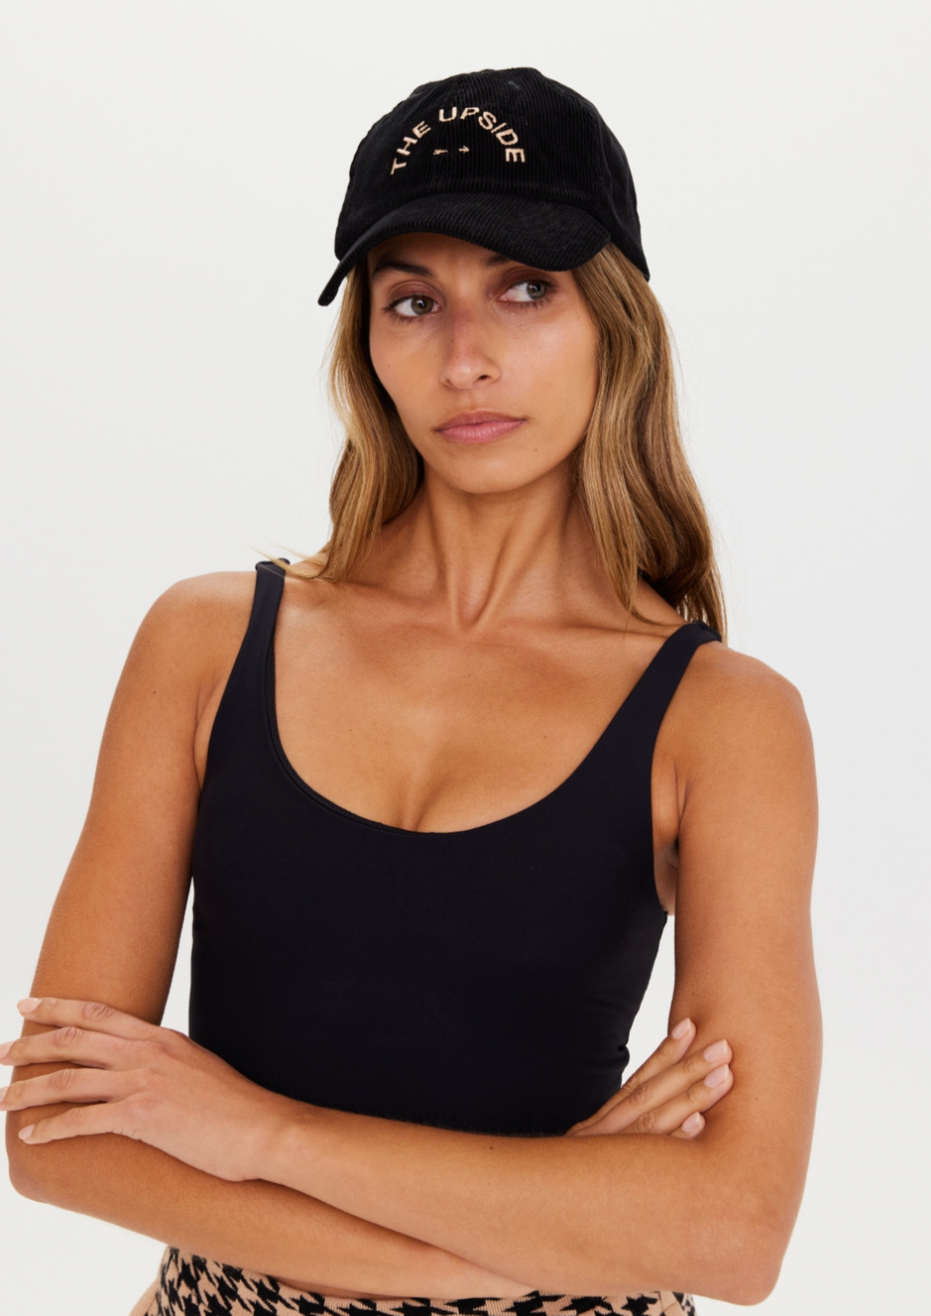 Corduroy Soft Cap - Black, by The Upside For a sophisticated take on sun smarts, discover our Corduroy Soft Cap.  Soft retro fit cap 'THE UPSIDE' embroidered preppy logo at front Adjustable velcro strap at back Soft corduroy fabrication in classic black